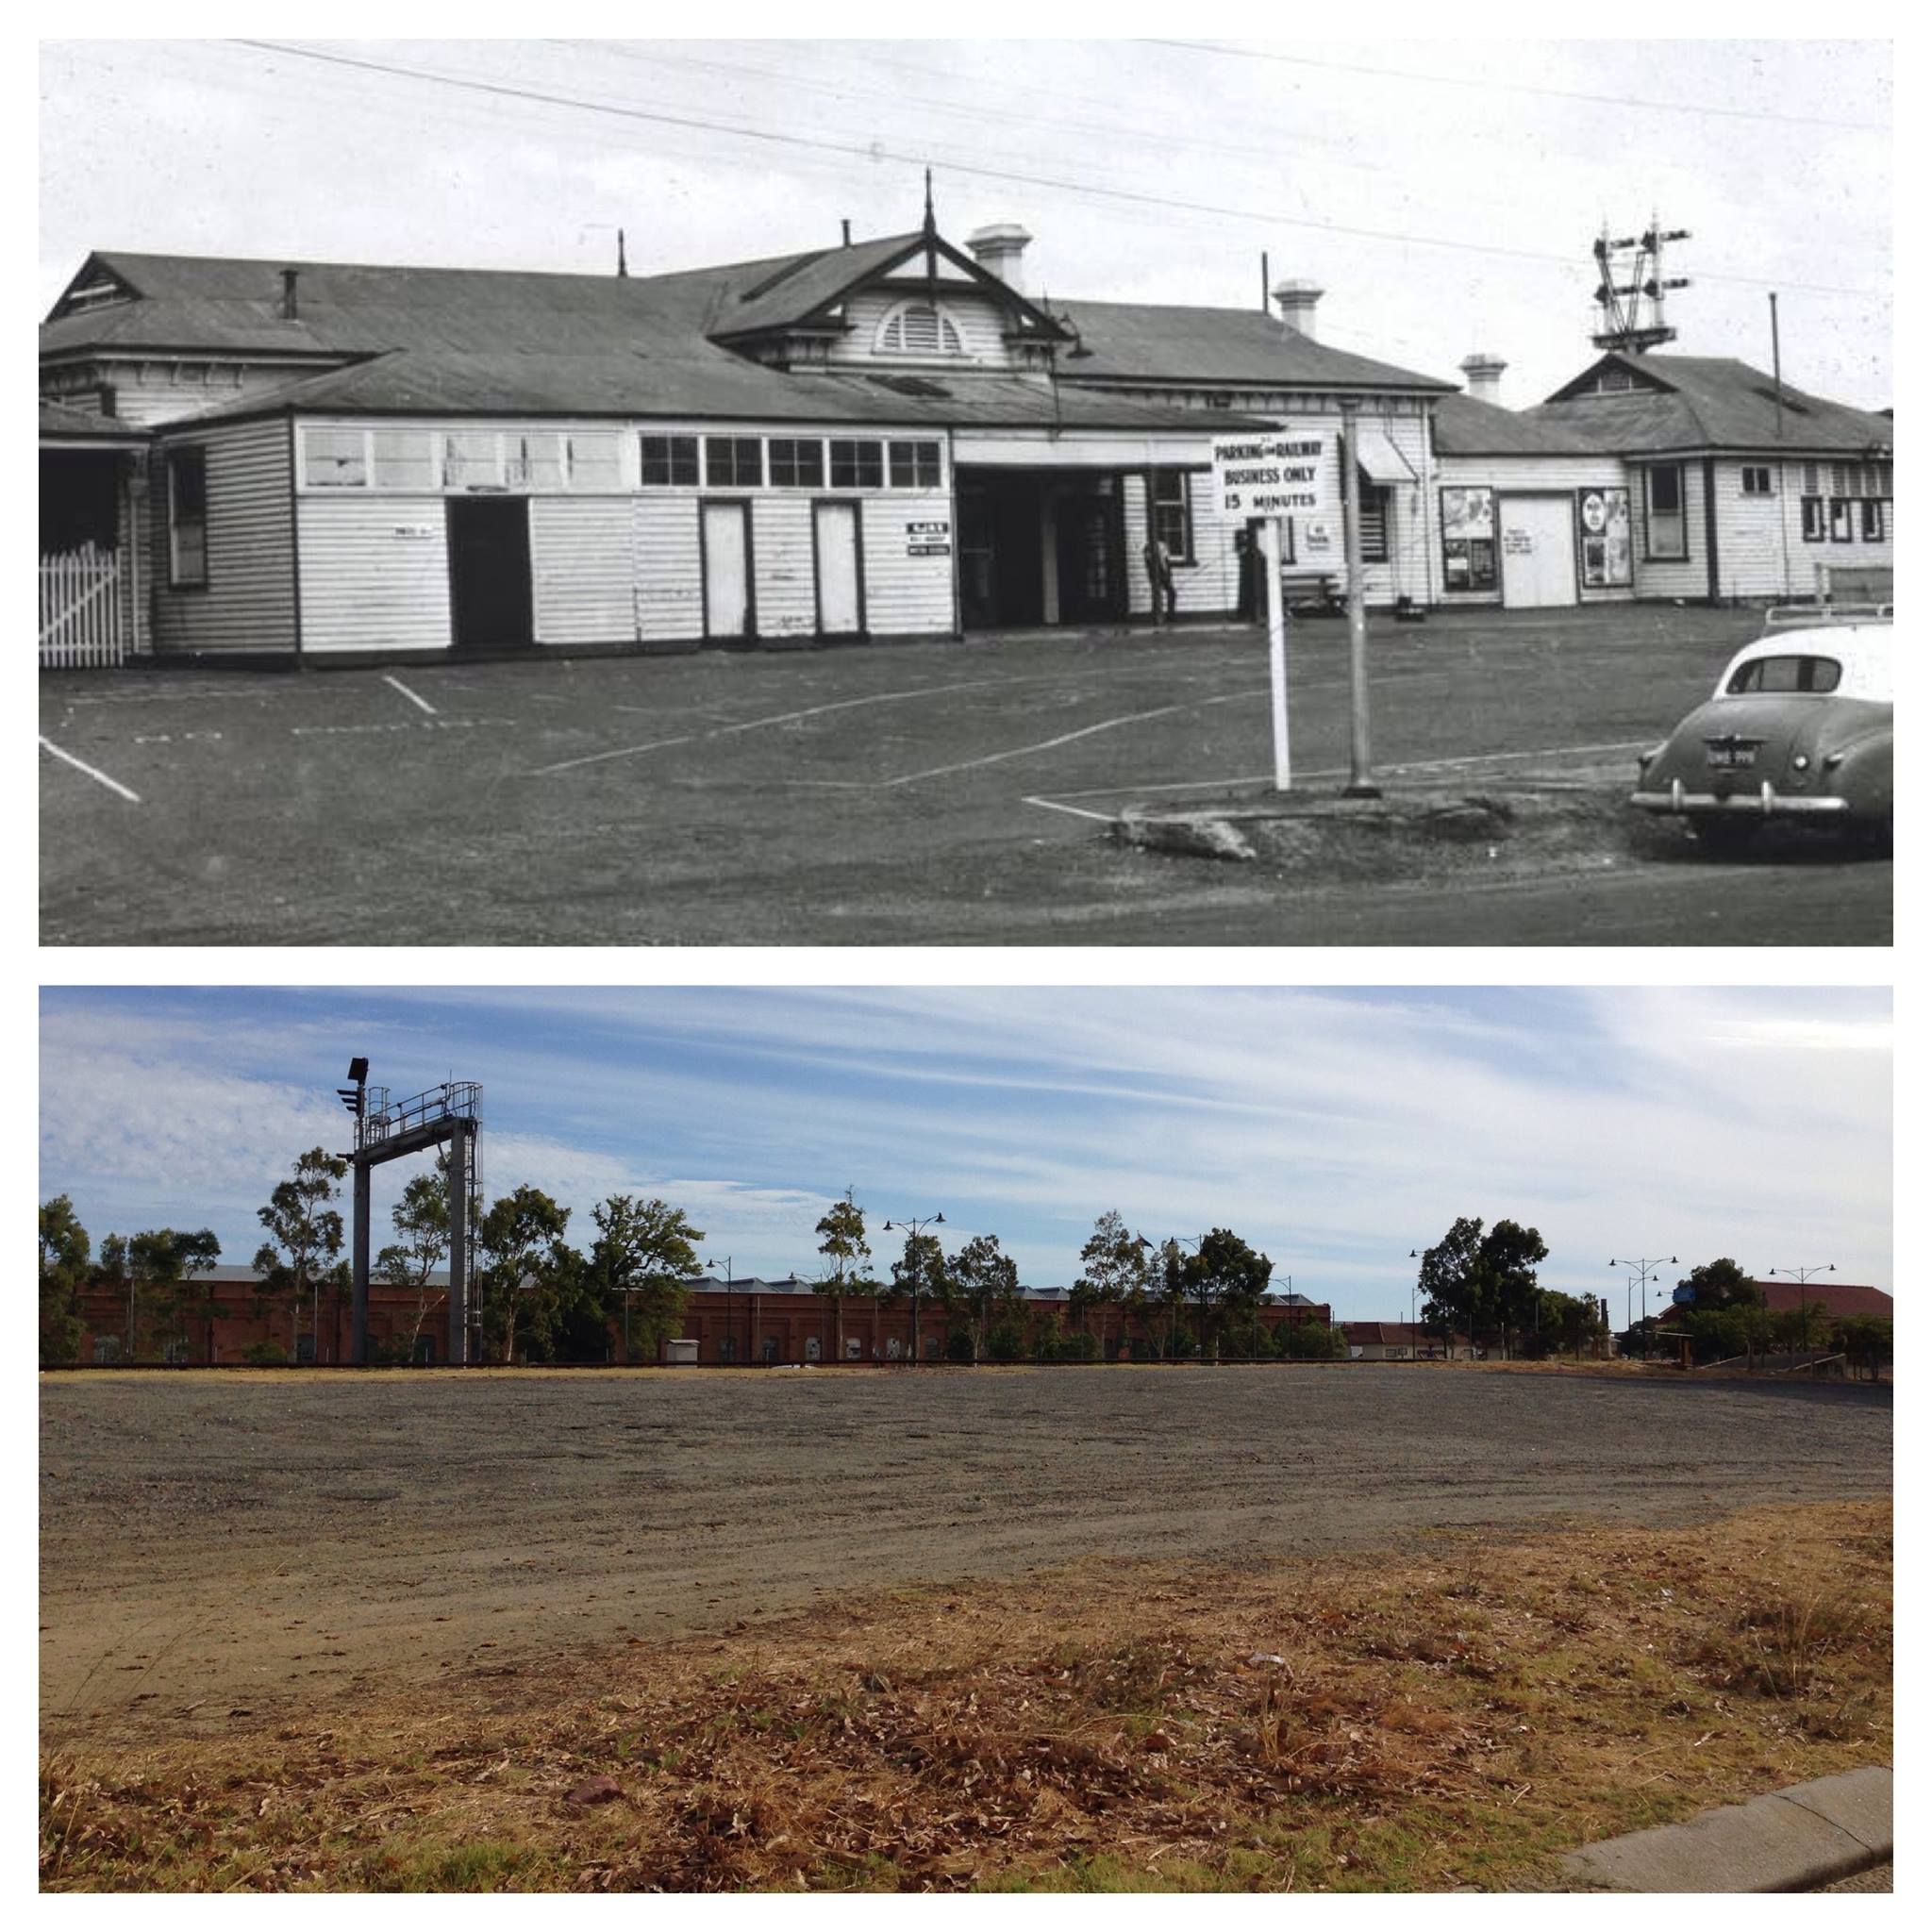 Then &amp; Now - Midland Junction Railway Station - Top Photo Late 50s to Early 60s - Image WAGR &amp; Rail Heritage WA &amp; Bottom Photo taken in 2014